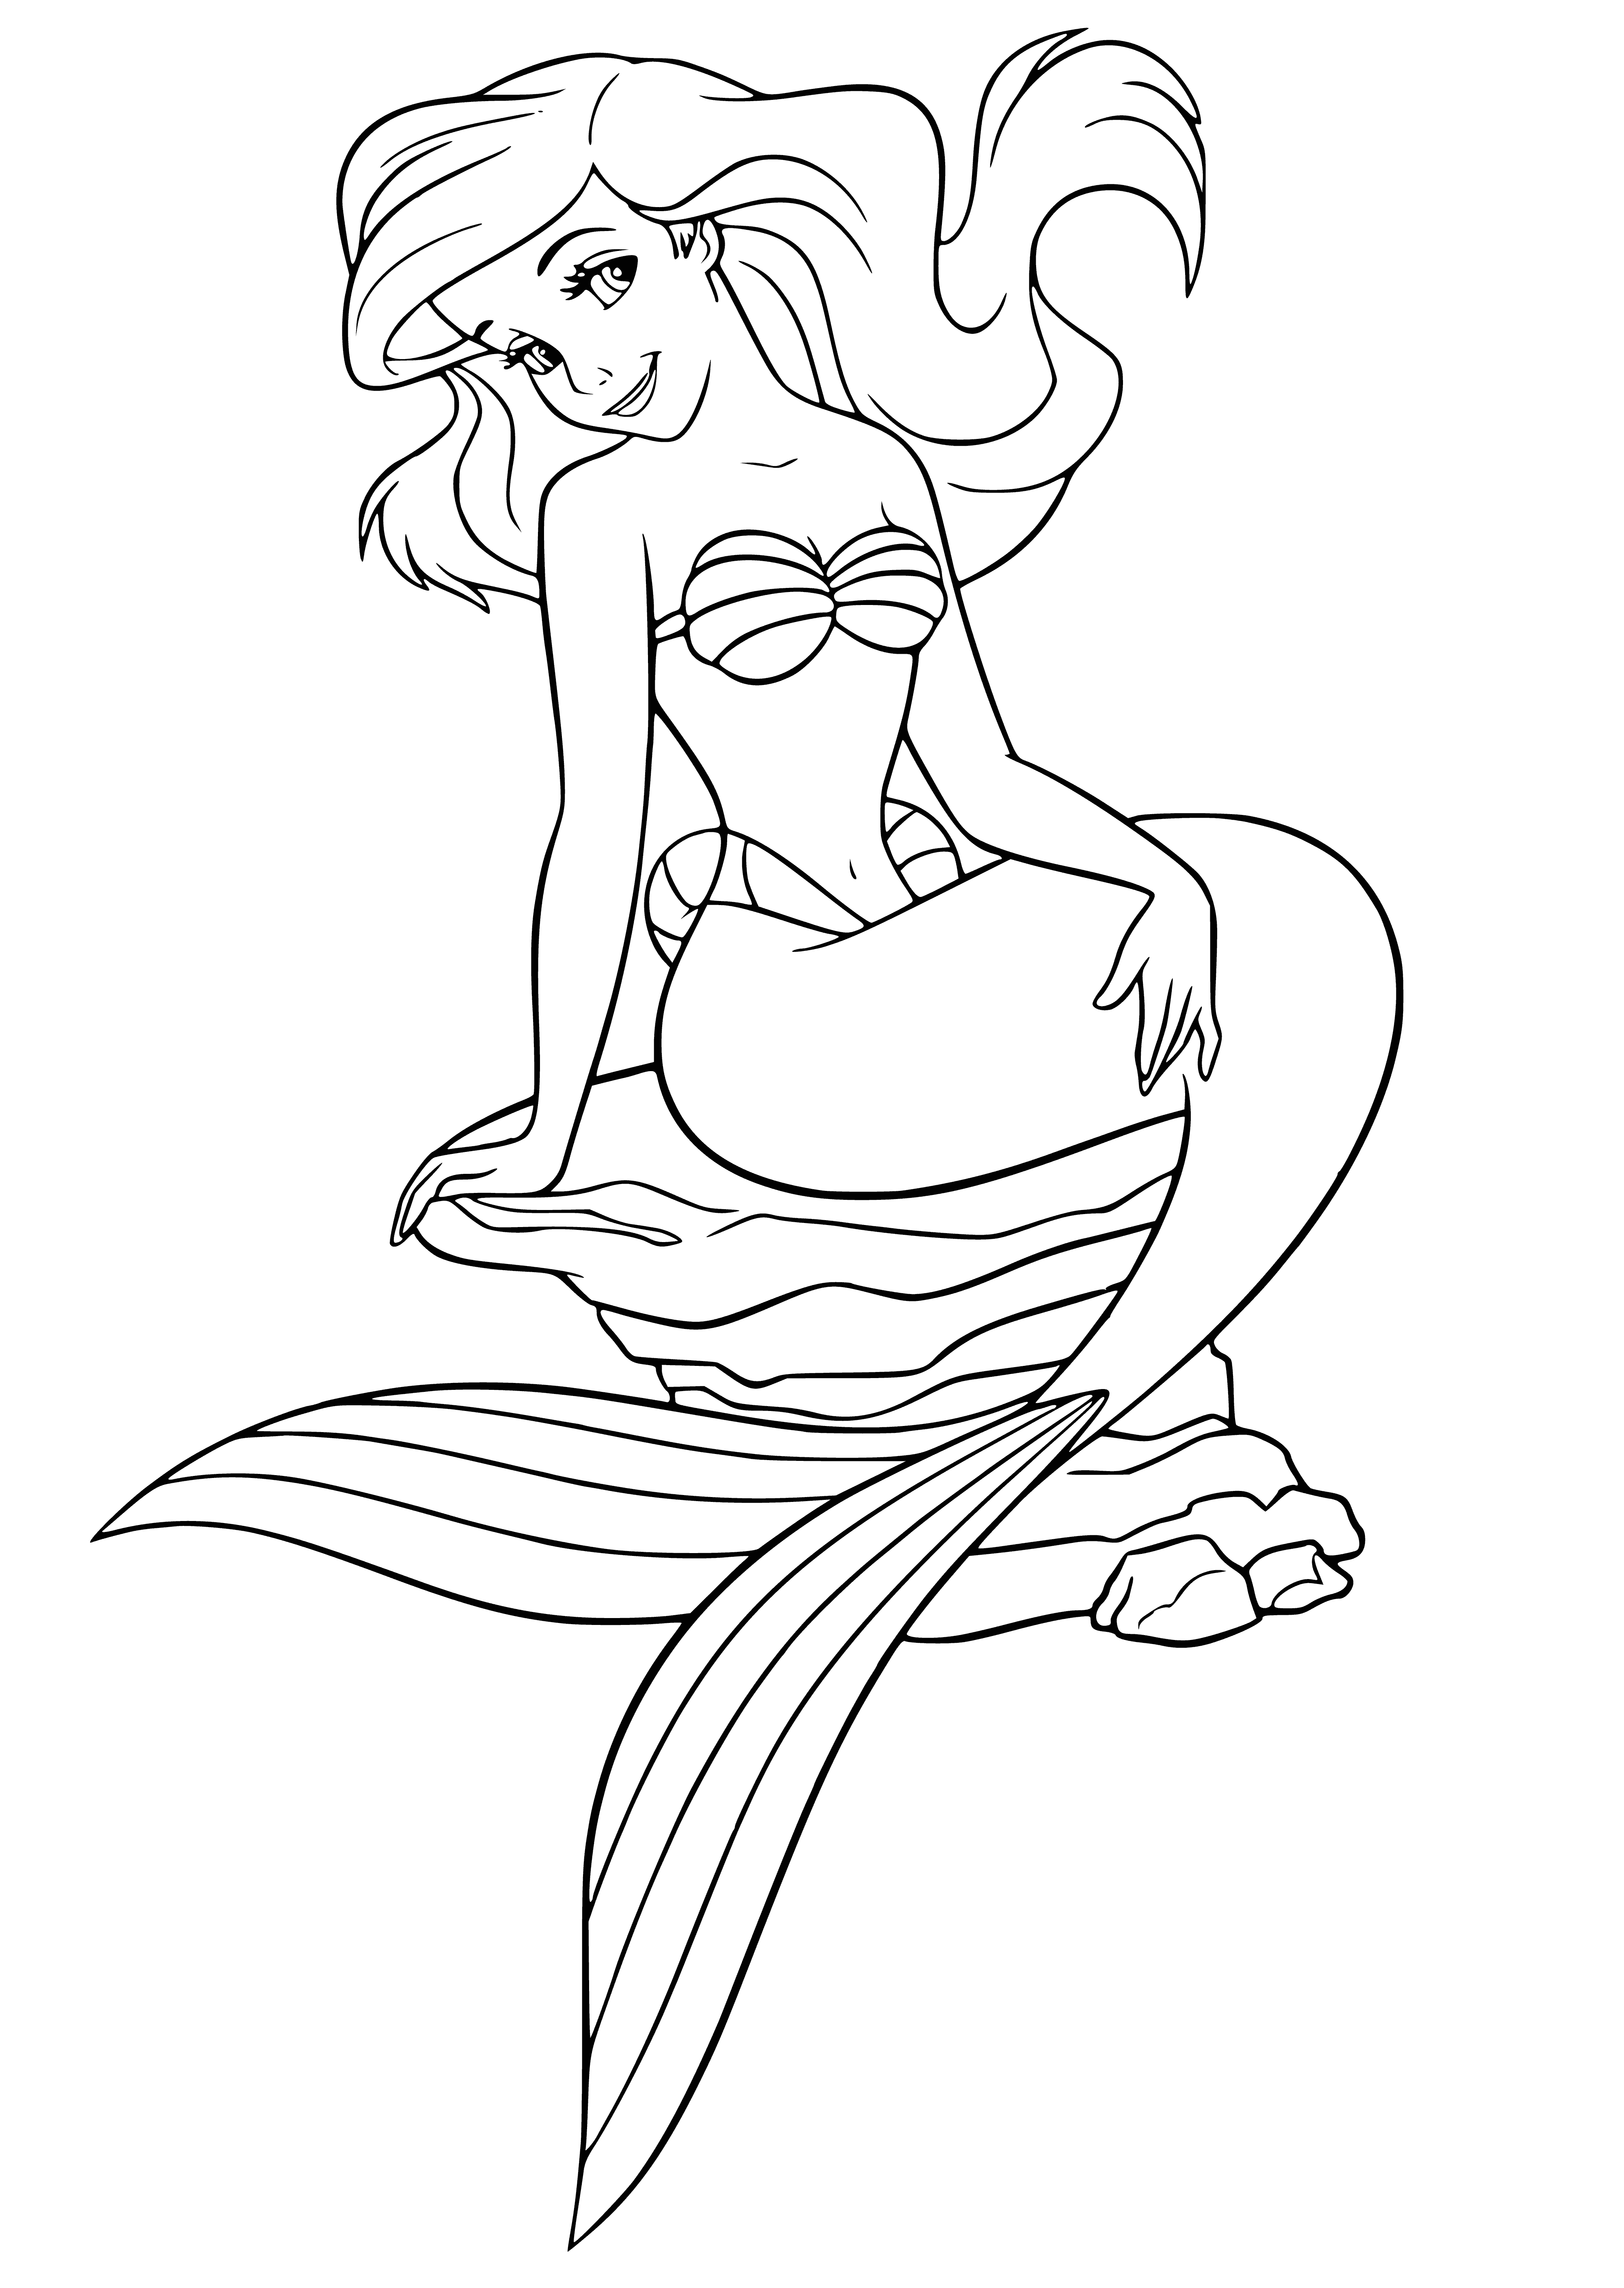 coloring page: Little mermaid Ariel with green tail, red hair, crown, & fork in hand graces a coloring page! #Coloring #Mermaid